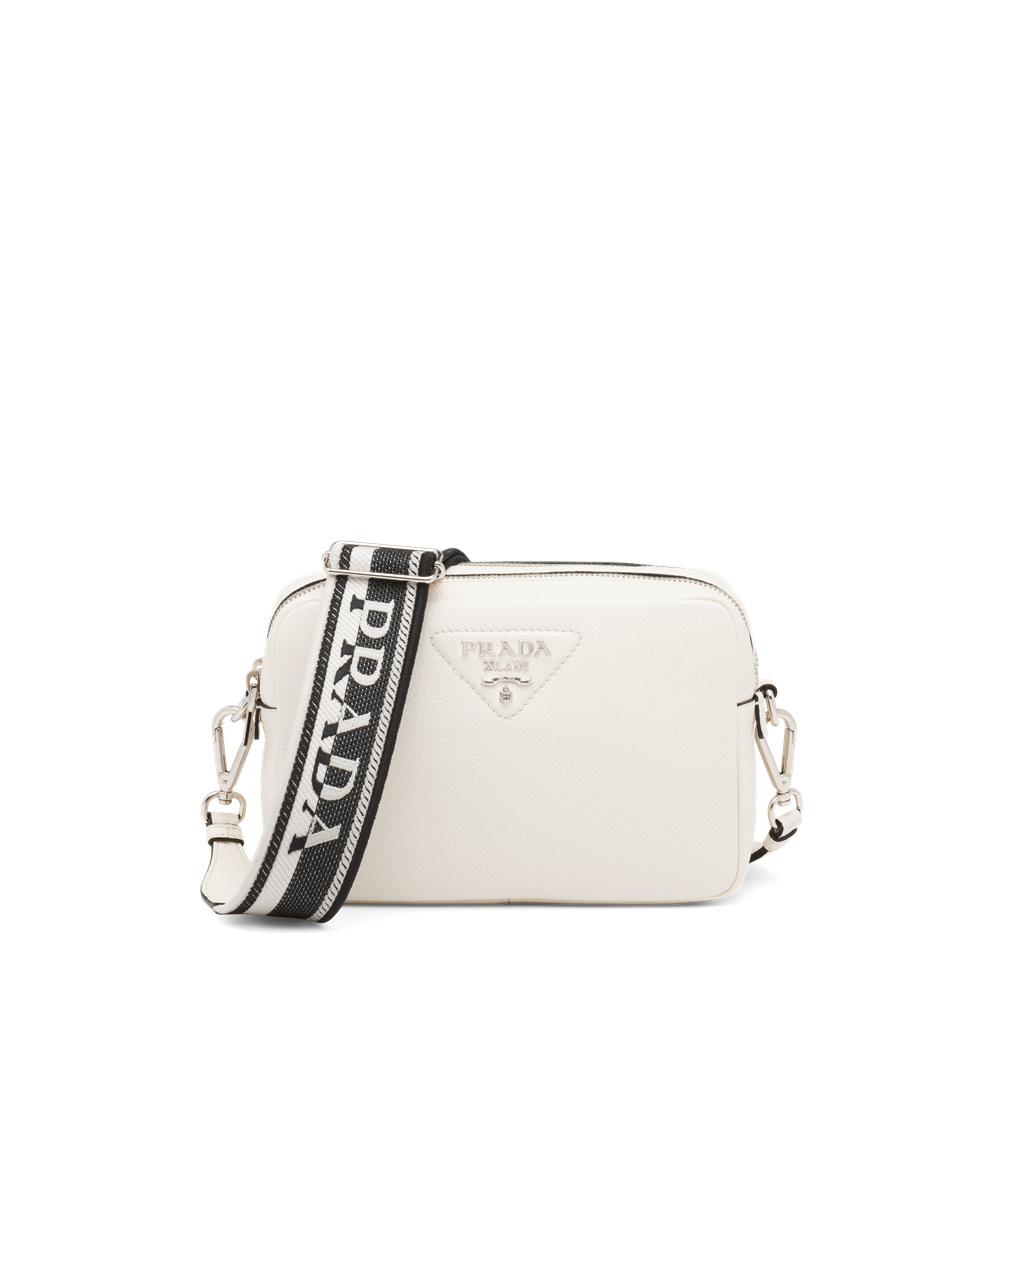 Prada – Prada Small Crossbody Tote White Brushed Leather – Queen Station